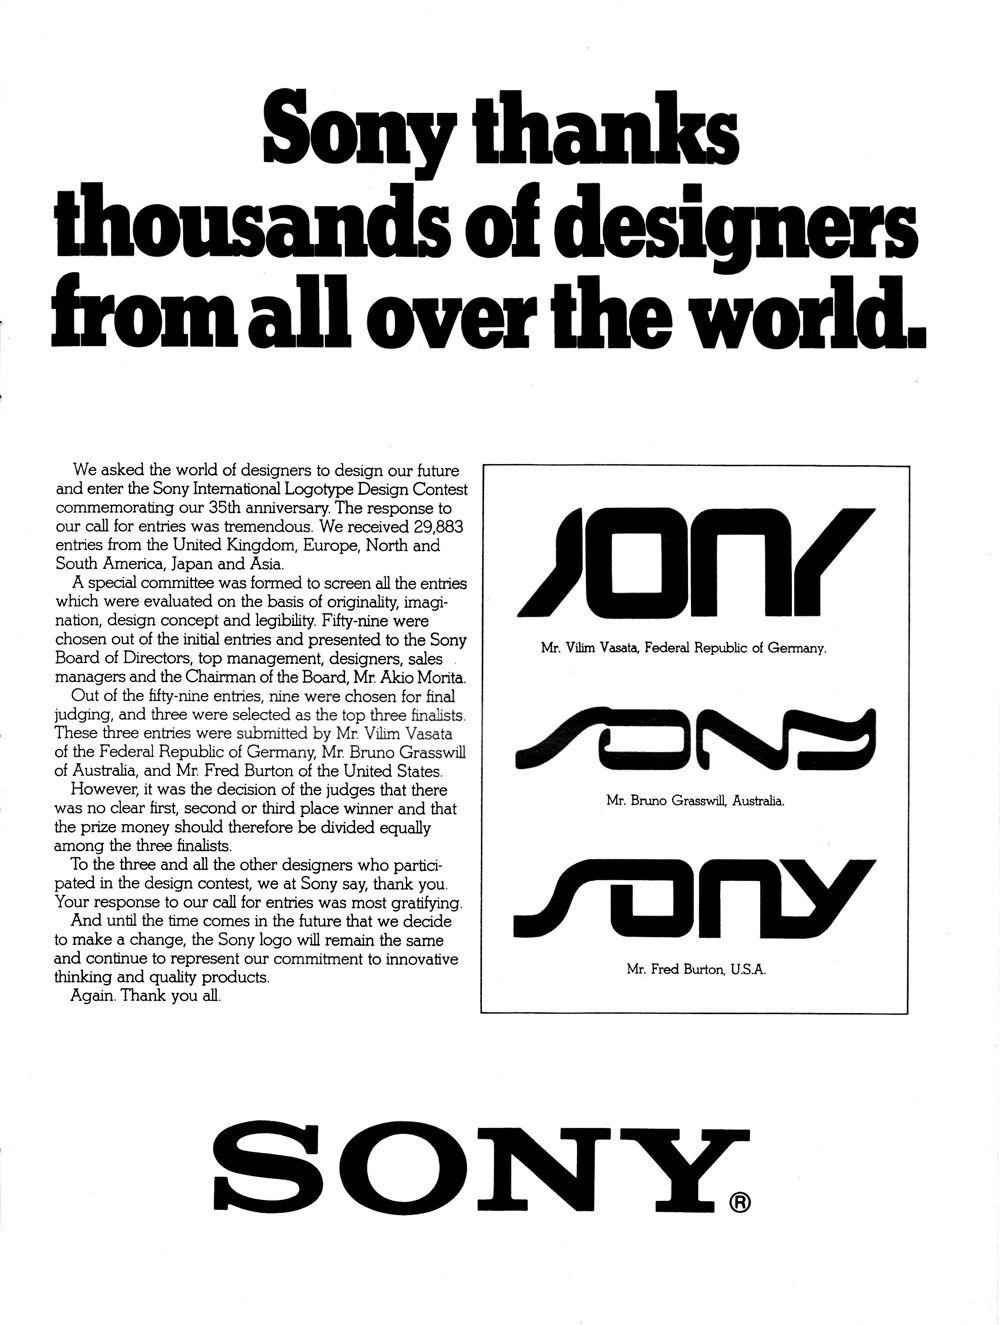 Old Sony Logo - Sony asked the public to redesign its logo in 1981. It didn't work